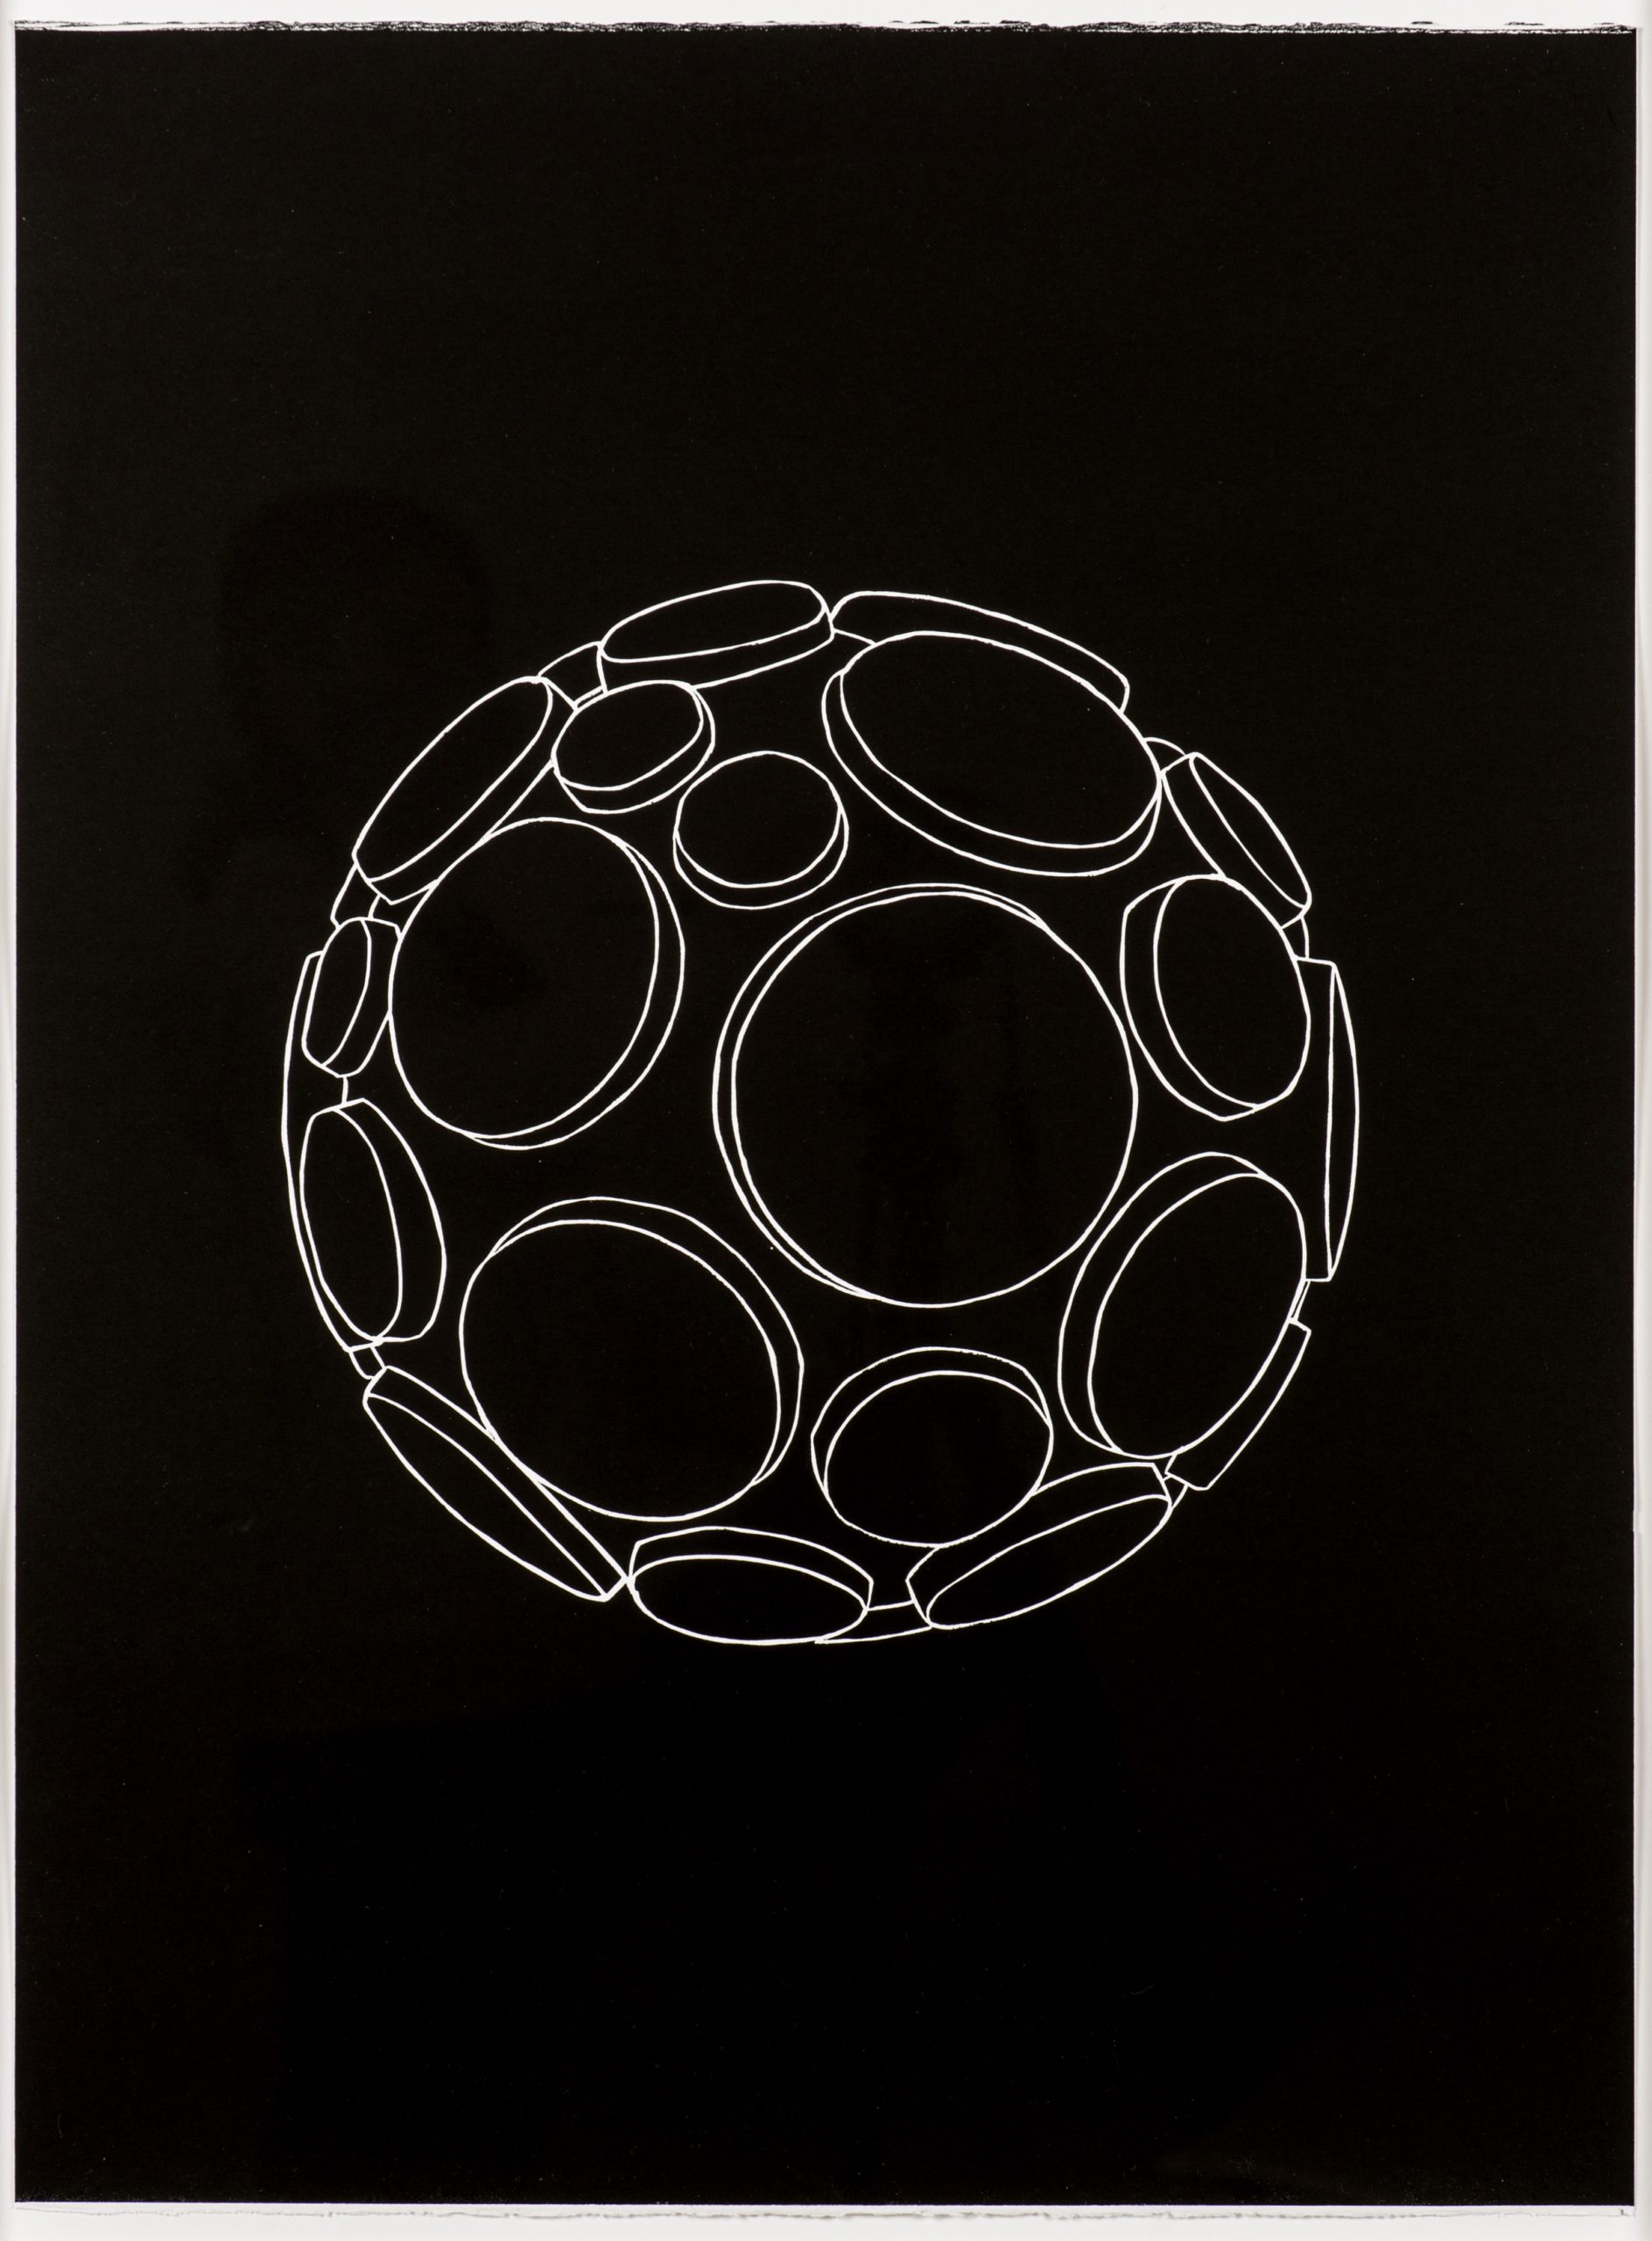 Claire Lieberman: "Funny Ball", 2022. Linocut, 30" x 22". Edition of 20.